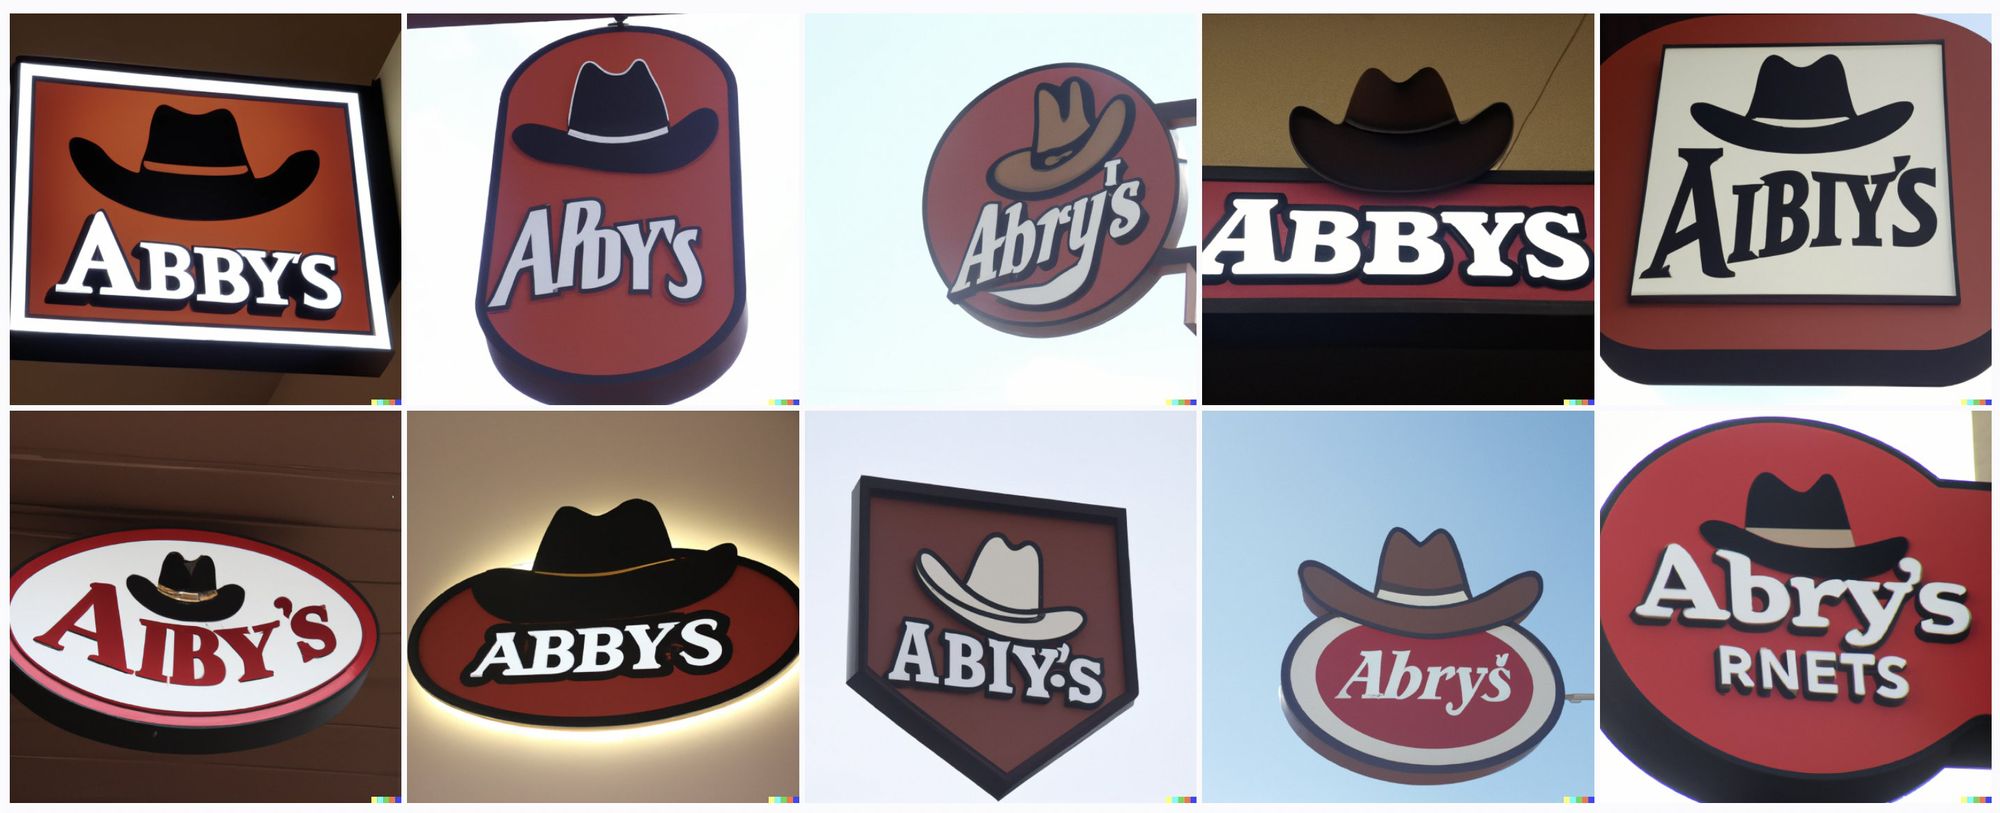 They are all signs with a brown cowby hat on top. The text reads variations on "Abby's", "Abry's", and "Aibiy's"